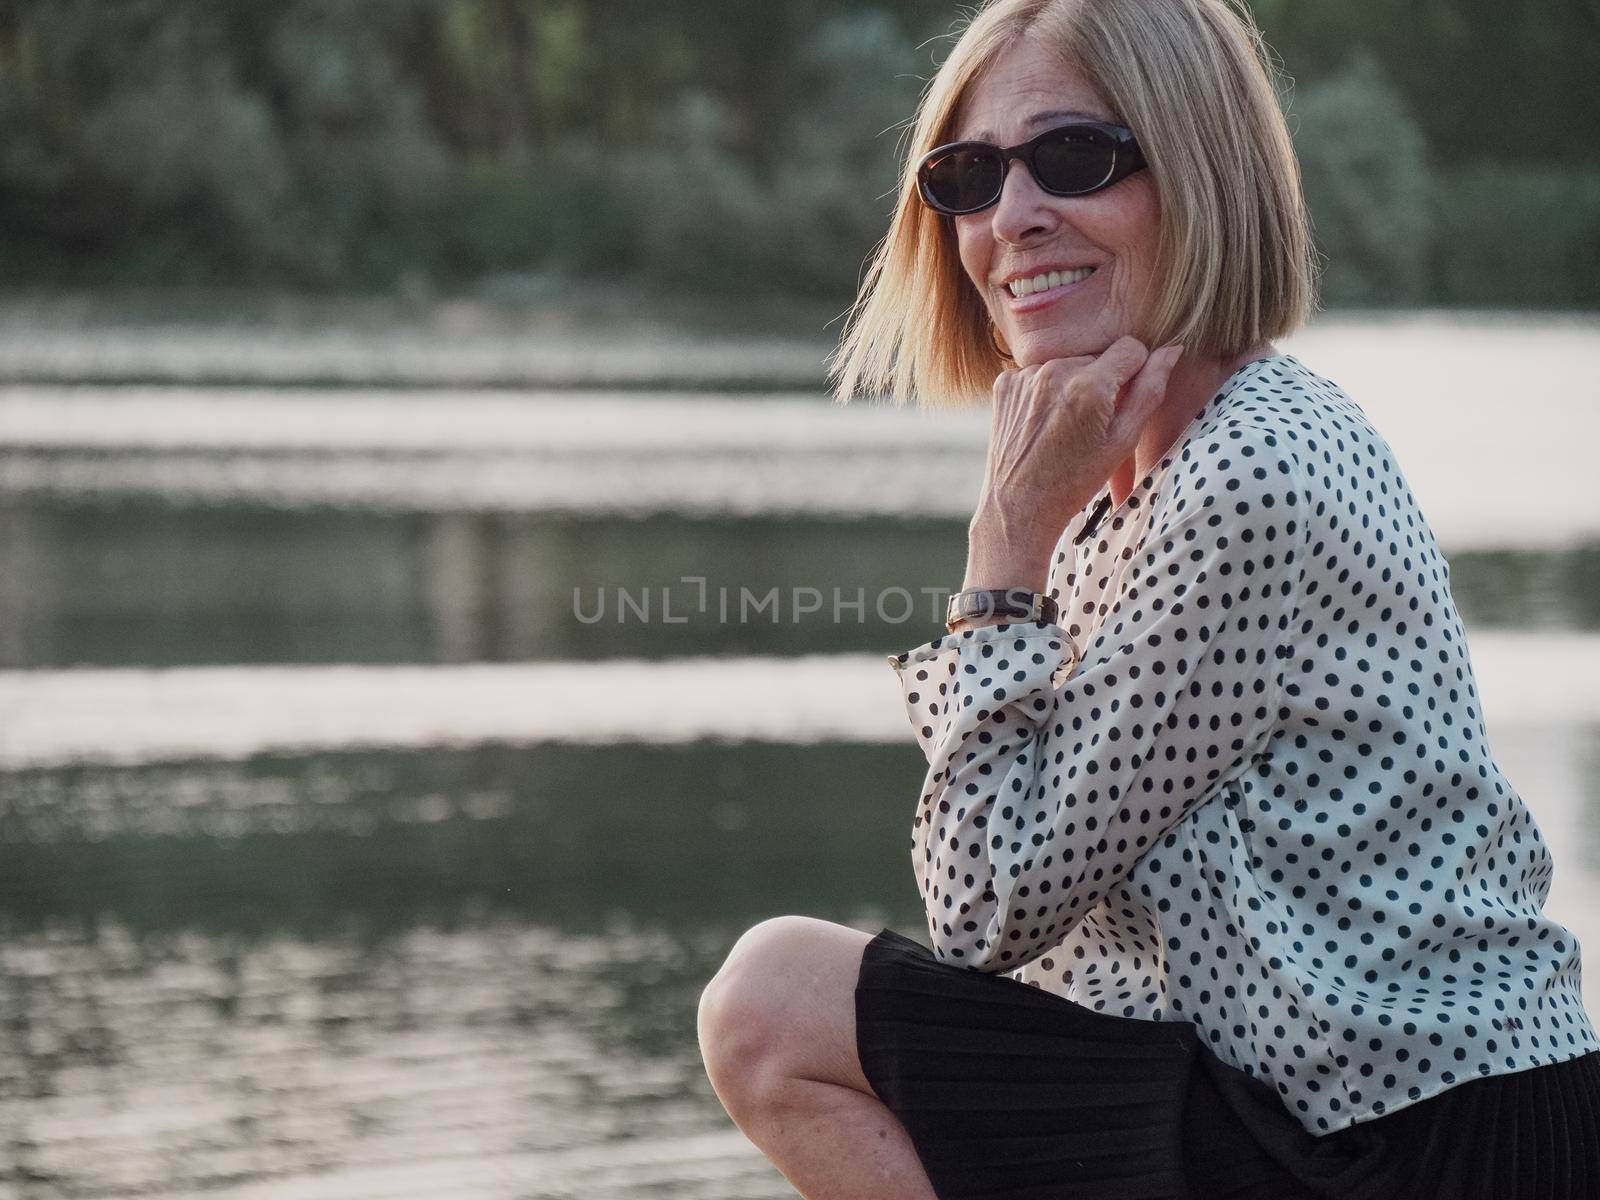 senior lady relaxing in the park wearing sunglasses near the river bank in summer